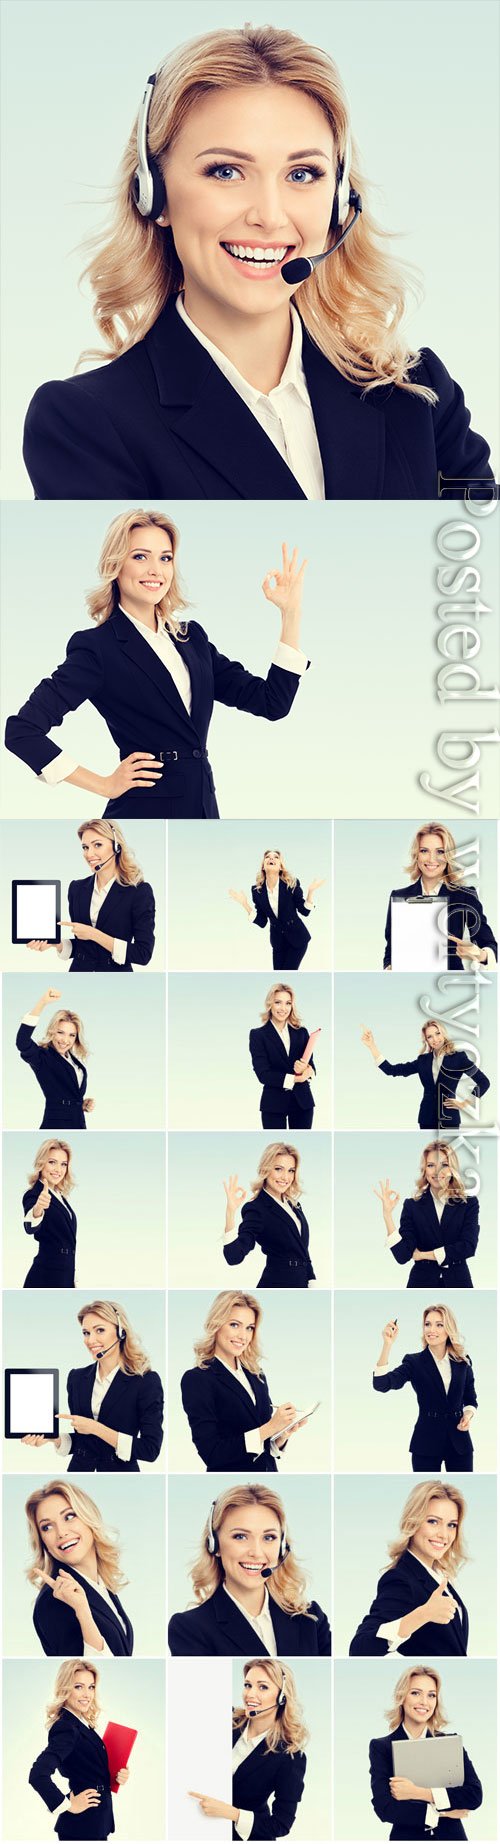 Business lady in various options stock photo